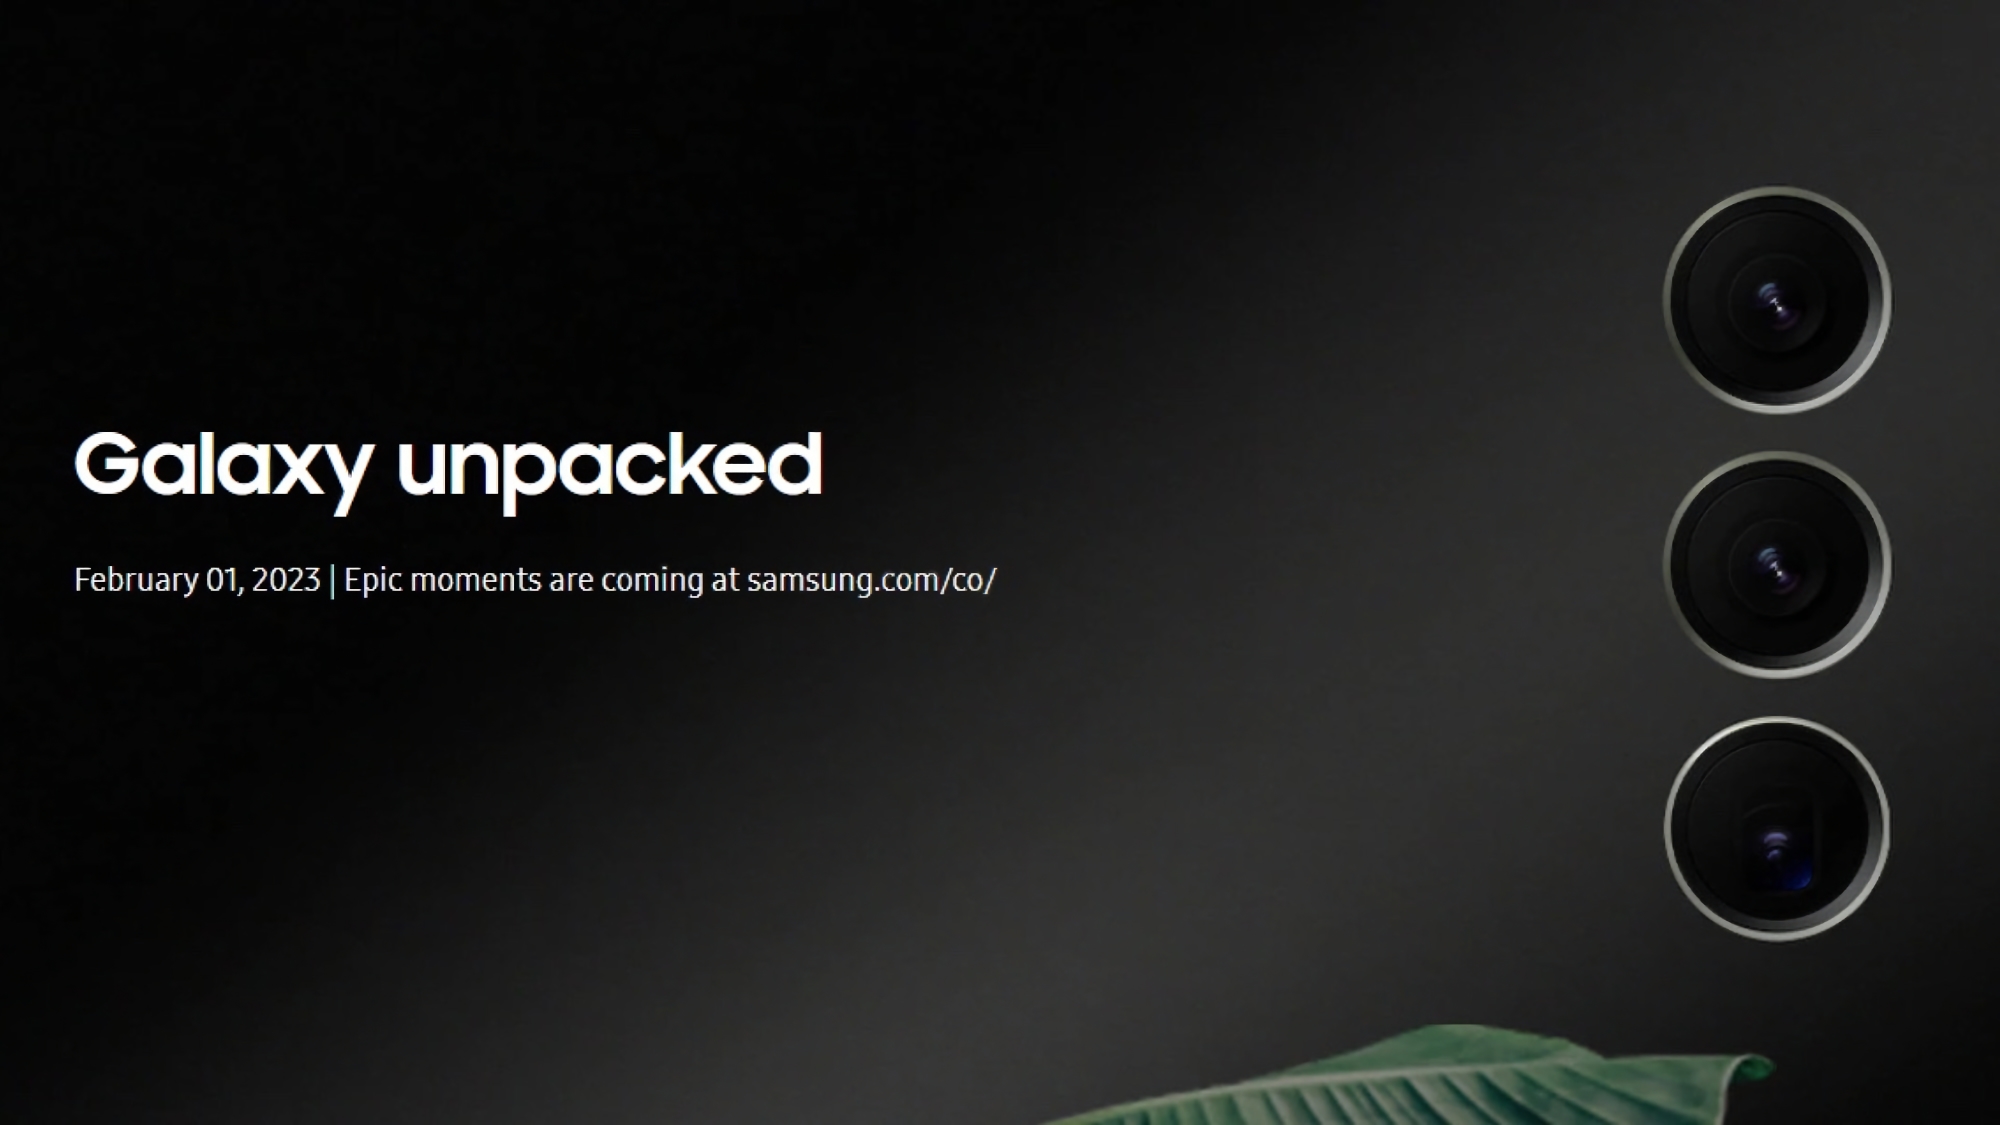 Samsung confirmed that the Galaxy S23, Galaxy S23+ and Galaxy S23 Ultra flagships will be unveiled at the Galaxy Unpacked presentation on February 1